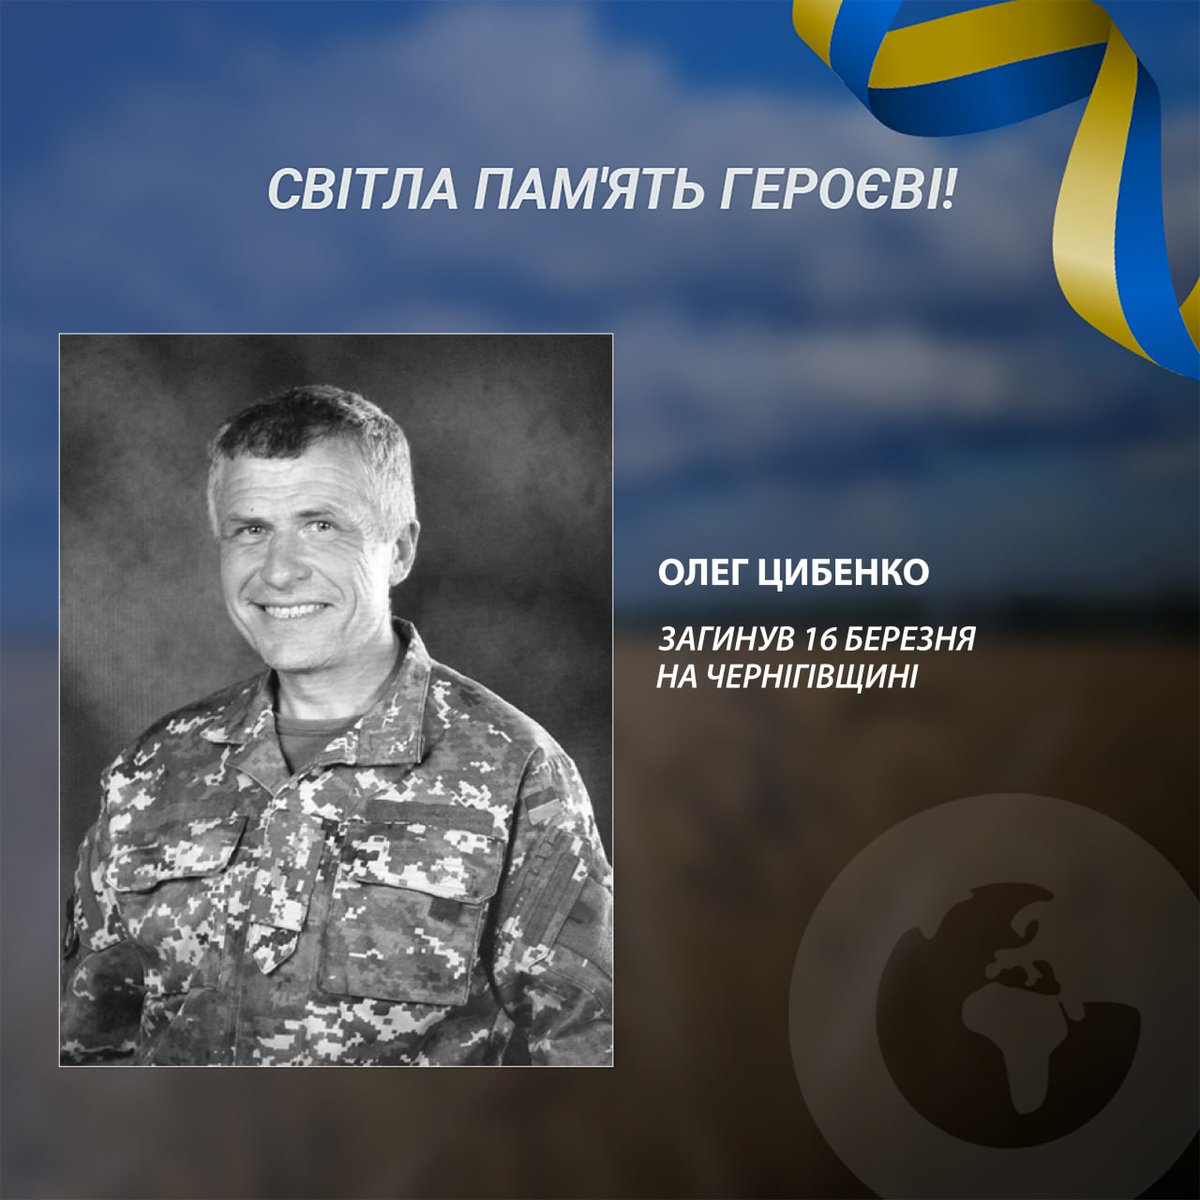 New day. And again at 9 in the morning. A time when we remember our fallen warriors. Today, along with others, we remember #Ukrainian Hero Oleg Tsibenka from #Chernihiv Oblast. In 1985, he graduated from the Leningrad Suvorov Military School, in 1989 from the Sumy Higher